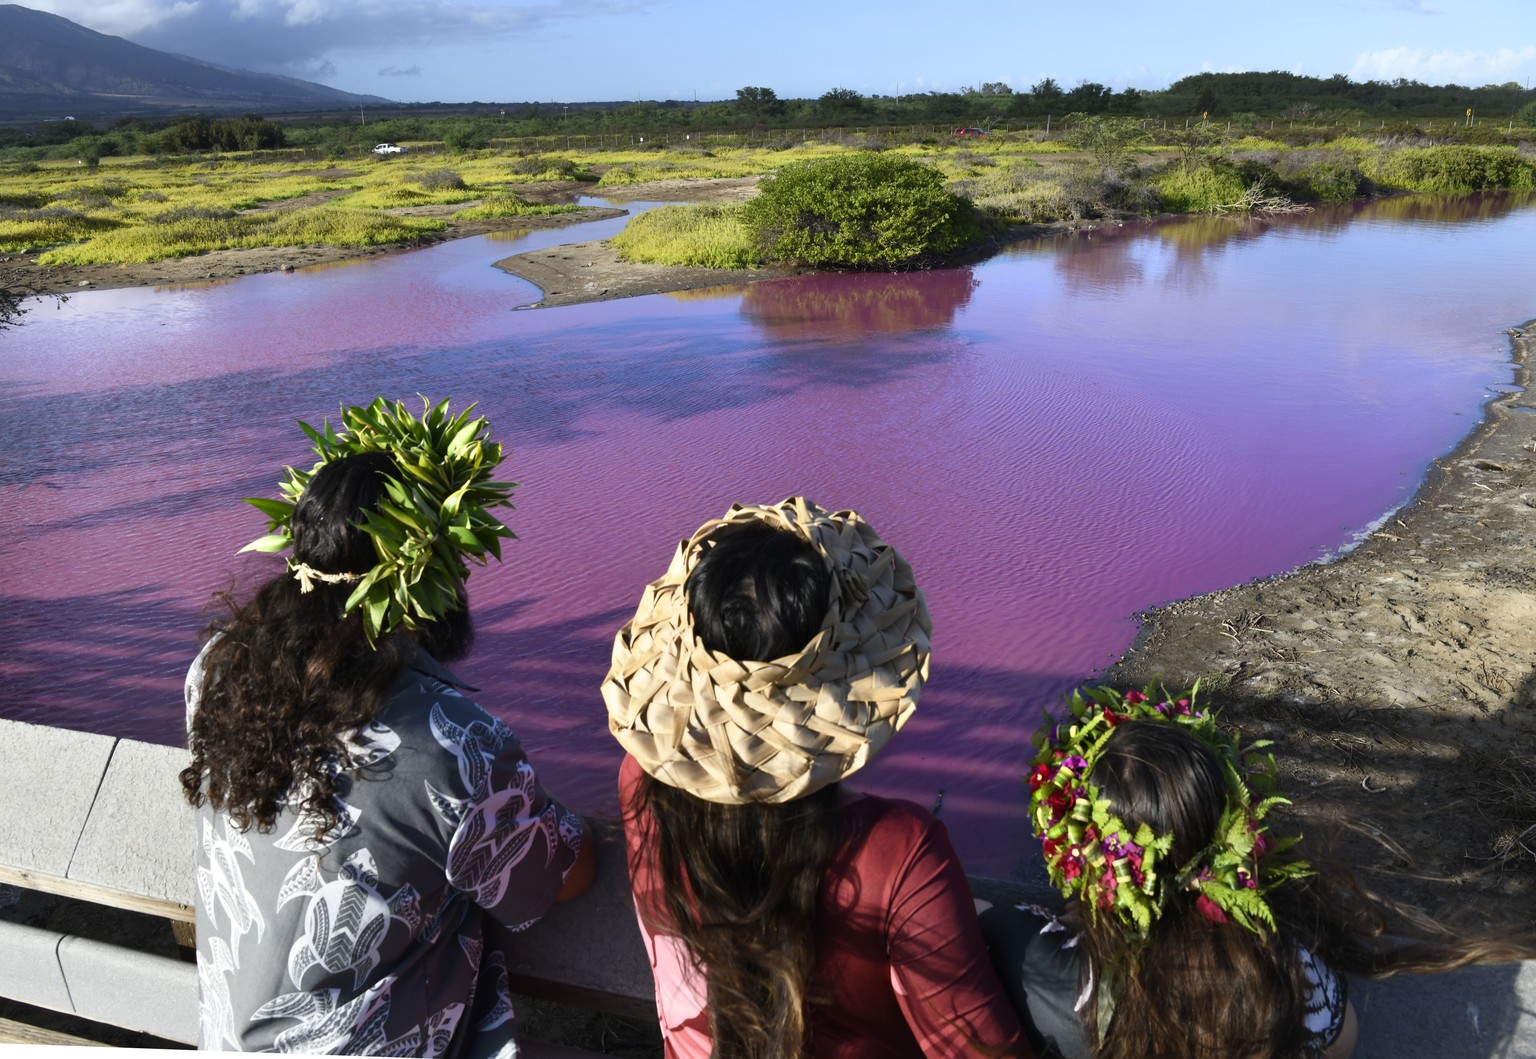 Shad Hanohano, from left, Leilani Fagner and their daughter Meleana Hanohano view the pink water at the Kealia Pond National Wildlife Refuge in Kihei, Hawaii on Wednesday, Nov. 8, 2023. Officials in H ...